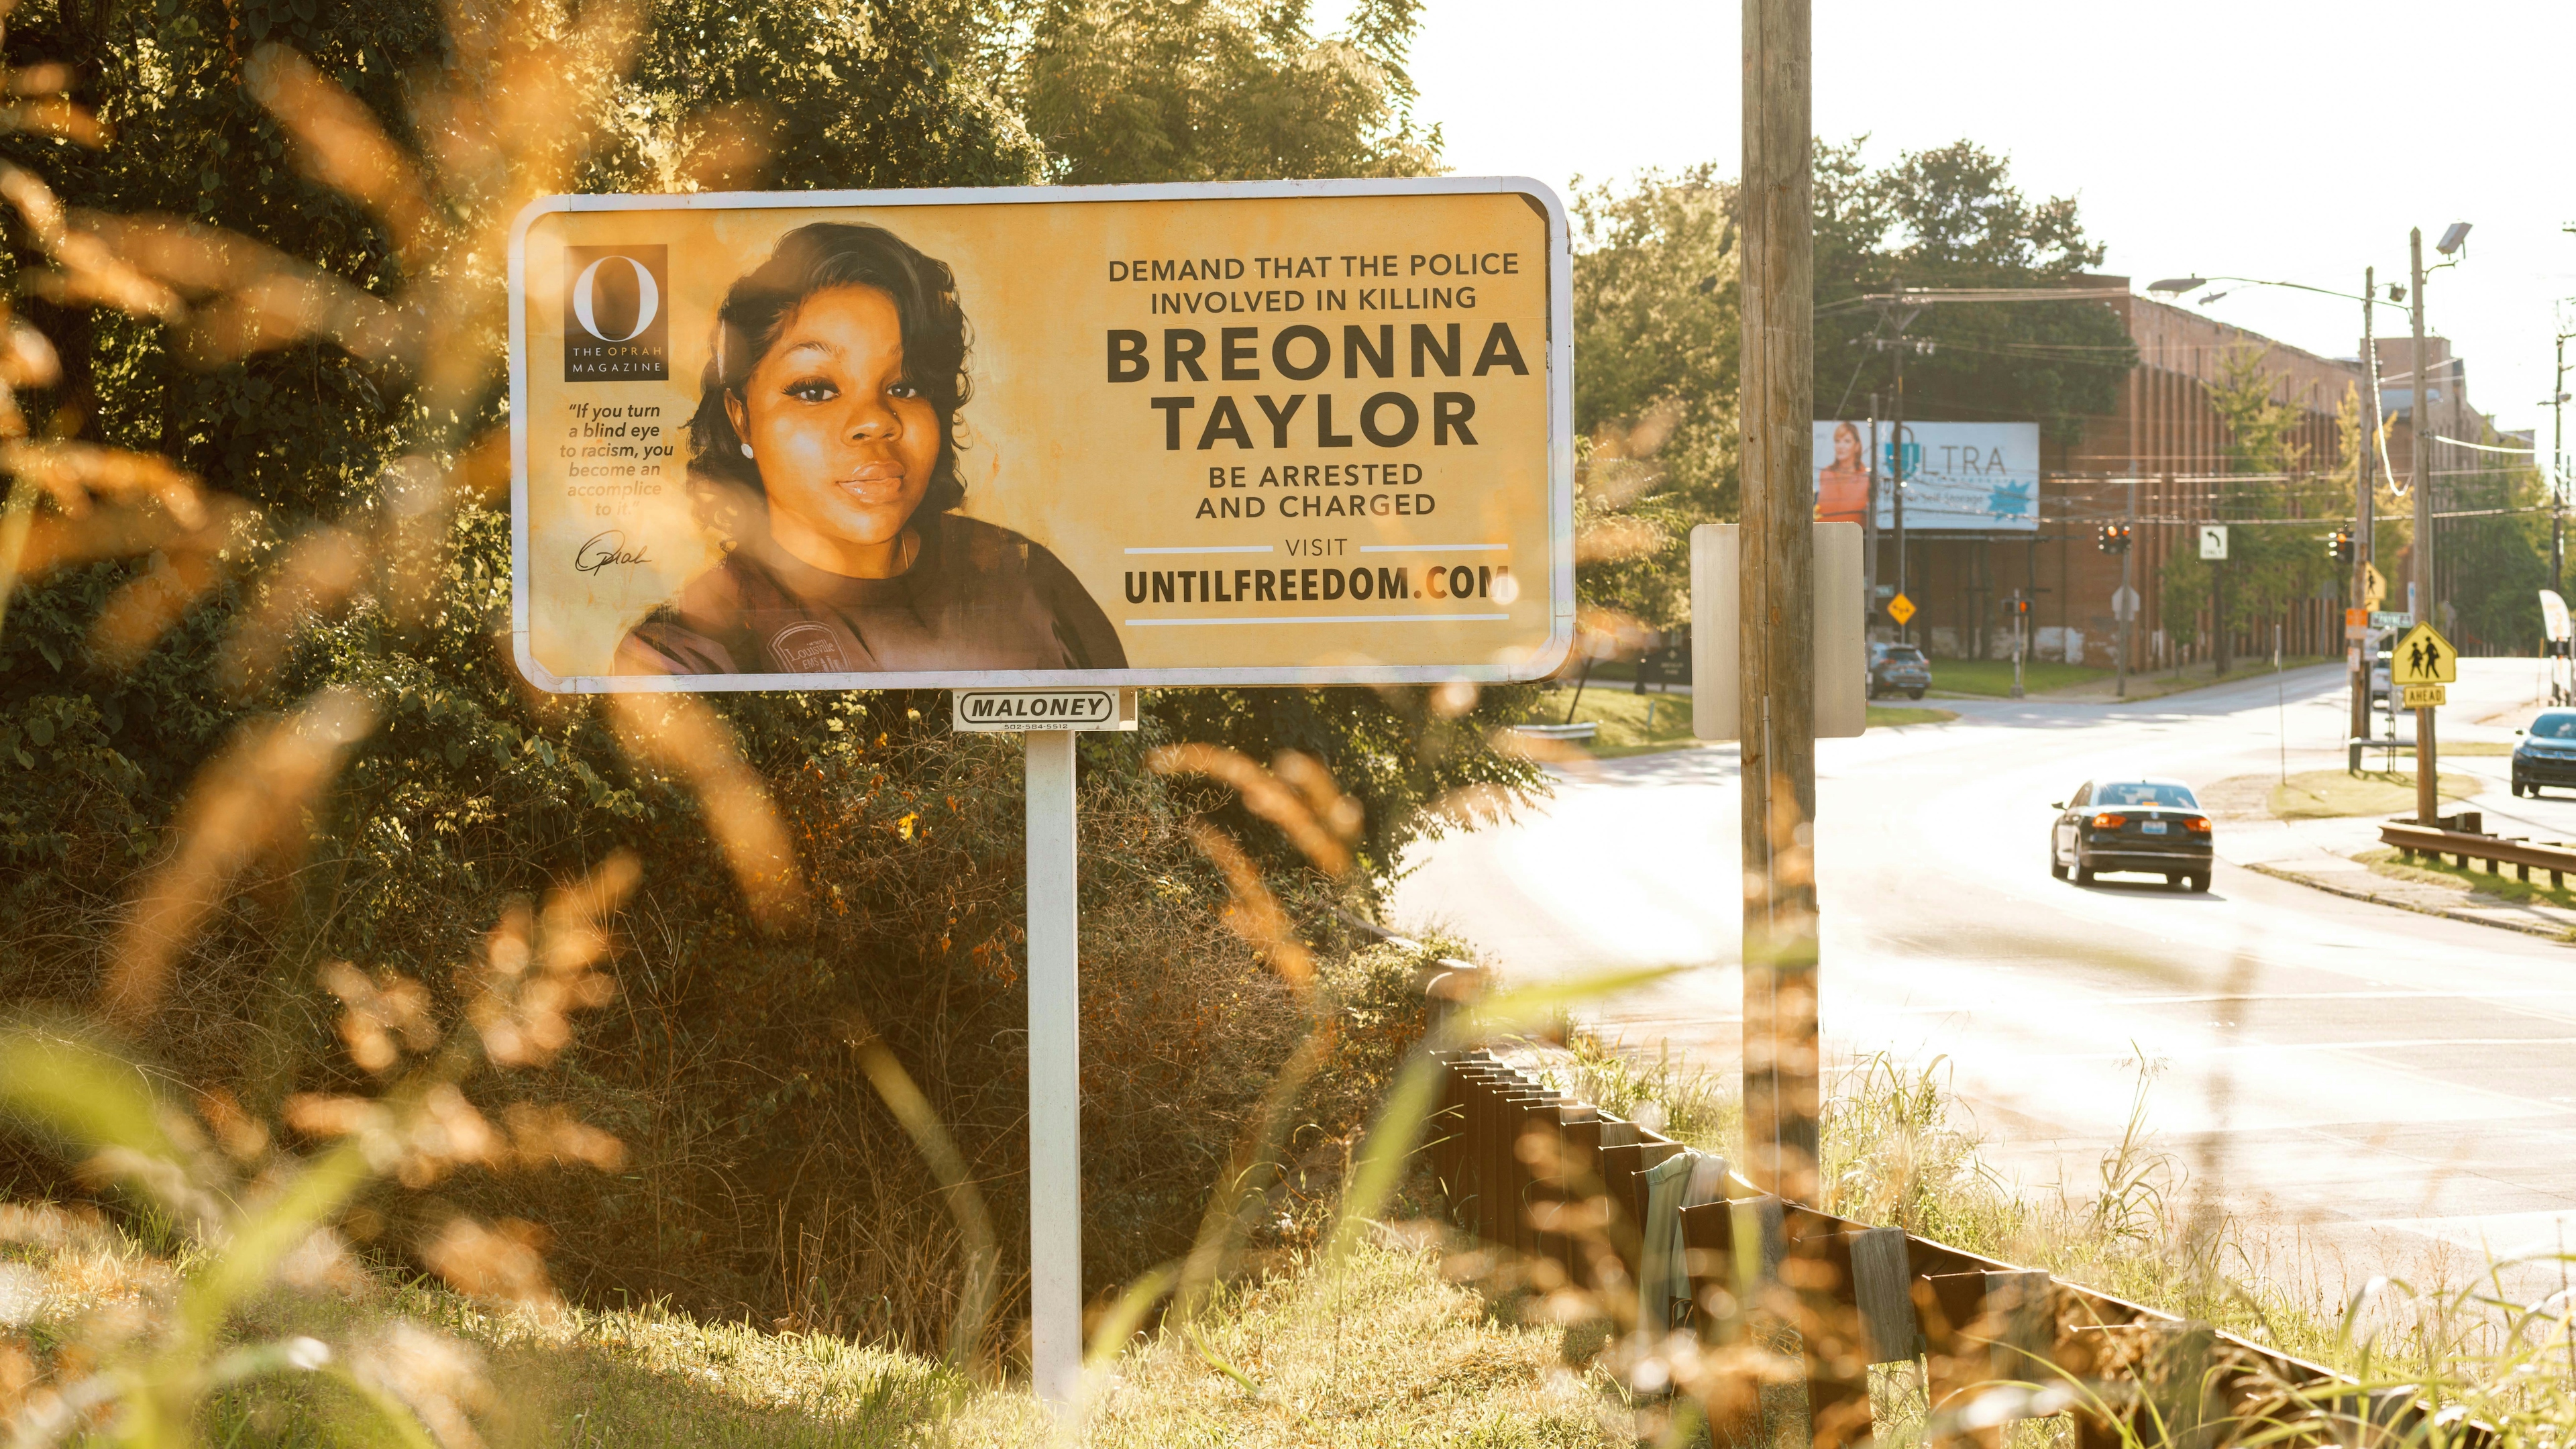 A billboard featuring a picture of Breonna Taylor and calling for the arrest of police officers involved in her death